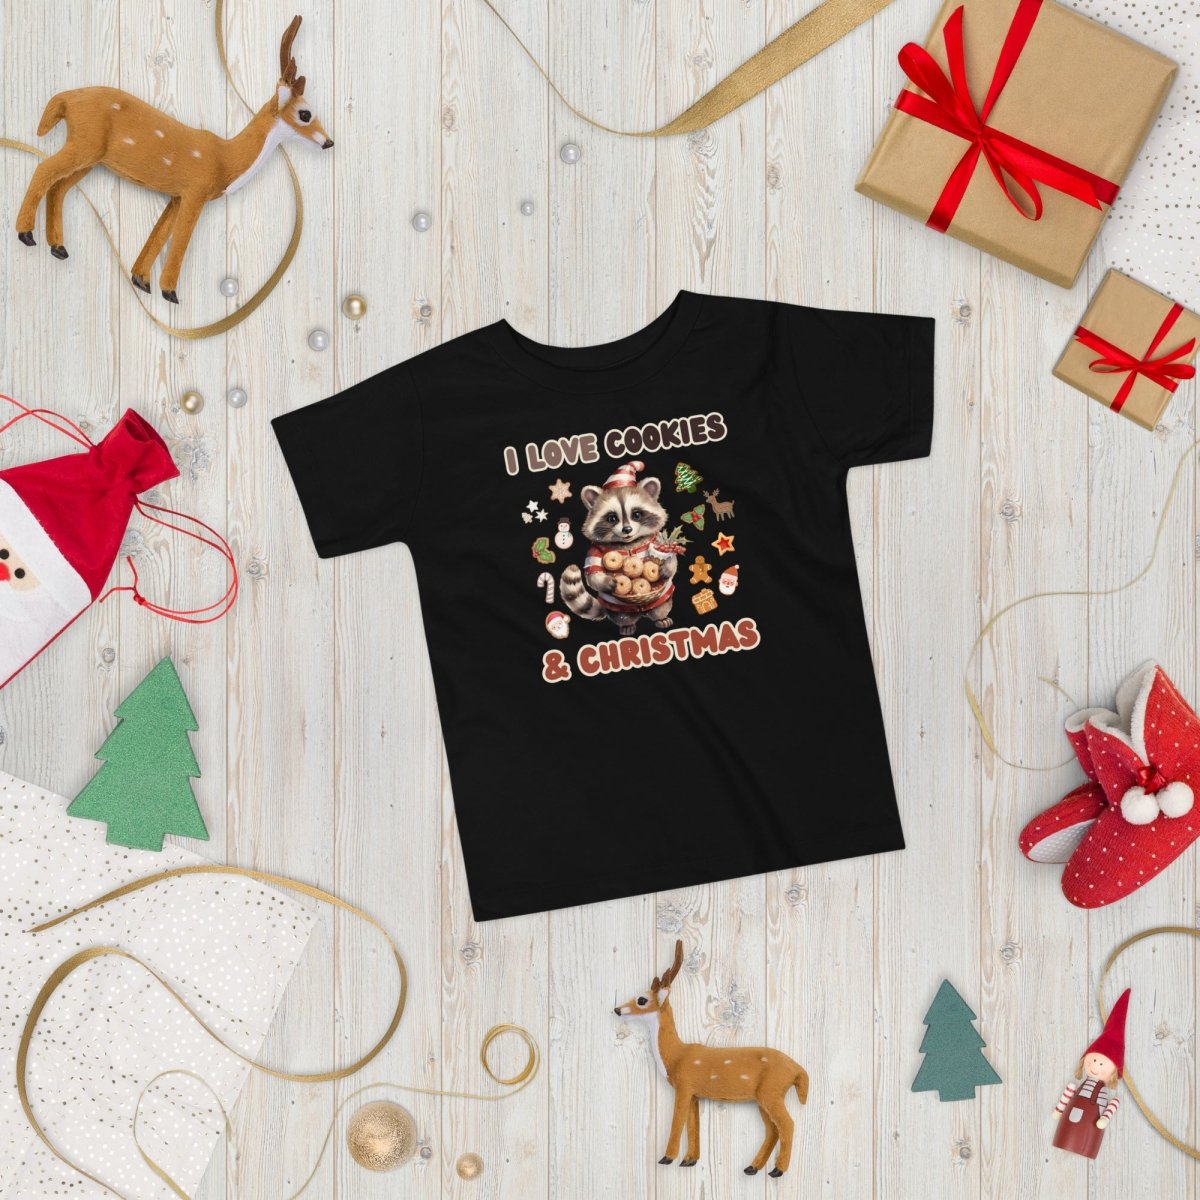 I love Christmas Cookies T-Shirt - High Quality Funny Children T-Shirt, Holiday Shirt, Toddler Christmas Vacation Tee, Cute Raccoon Tee - Everything Pixel